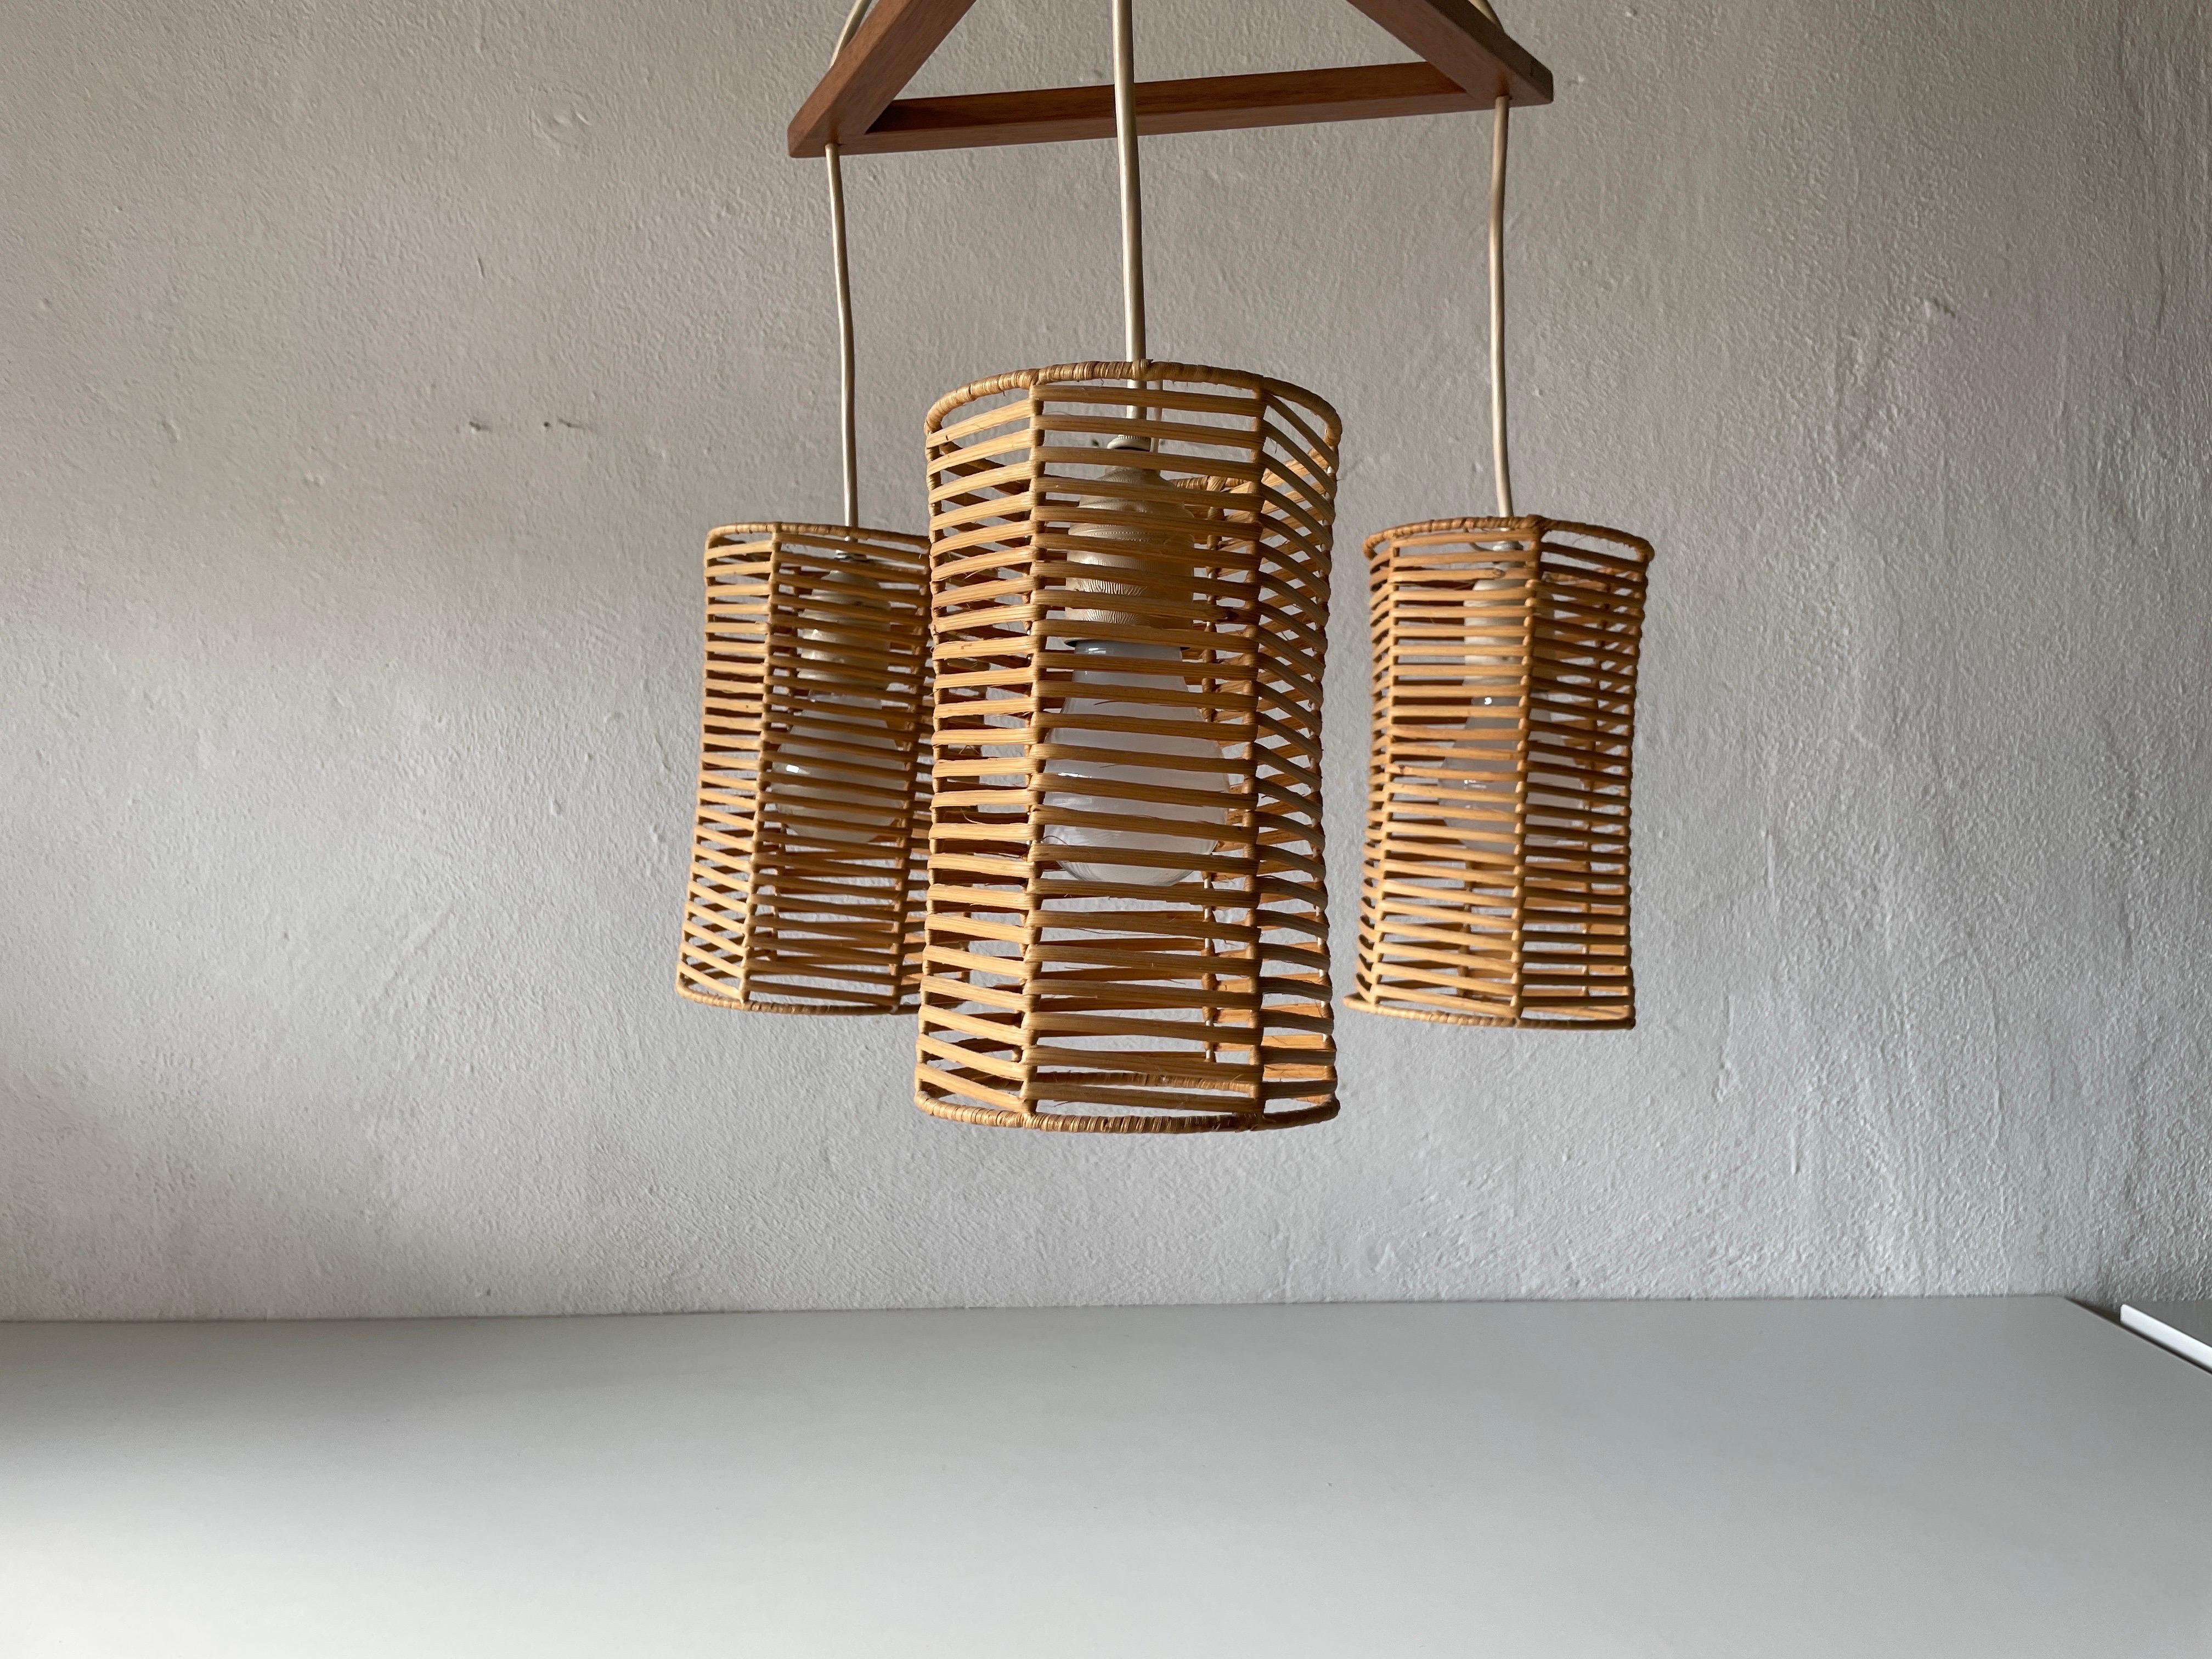 Triple Shade Wicker and Wood Pendant Lamp, 1960s, Germany For Sale 2